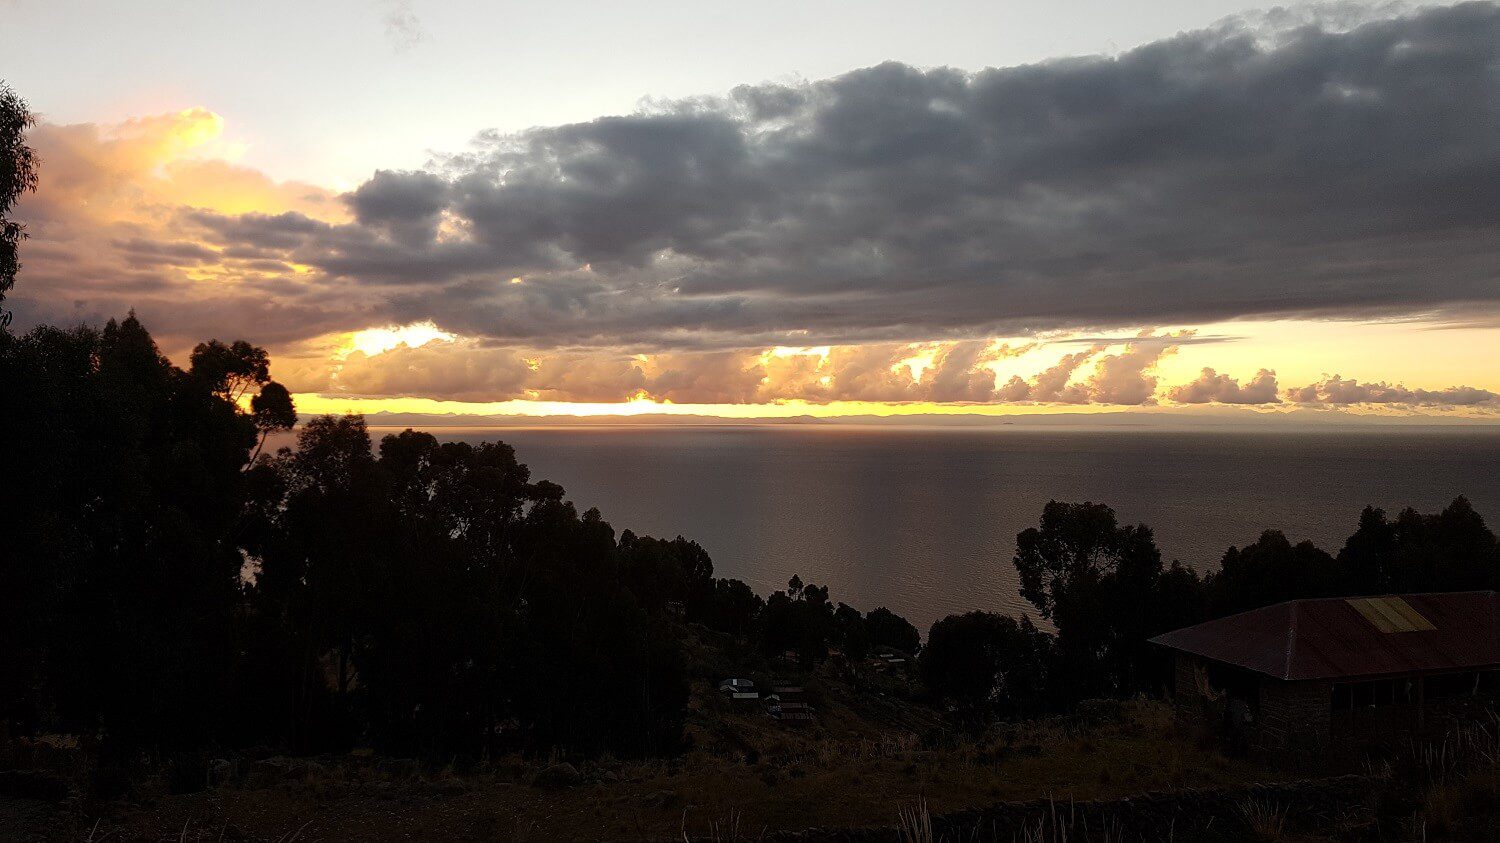 11Sunset over Lake Titicaca as seen from Taquile island, Peru. RESPONSible Travel Peru